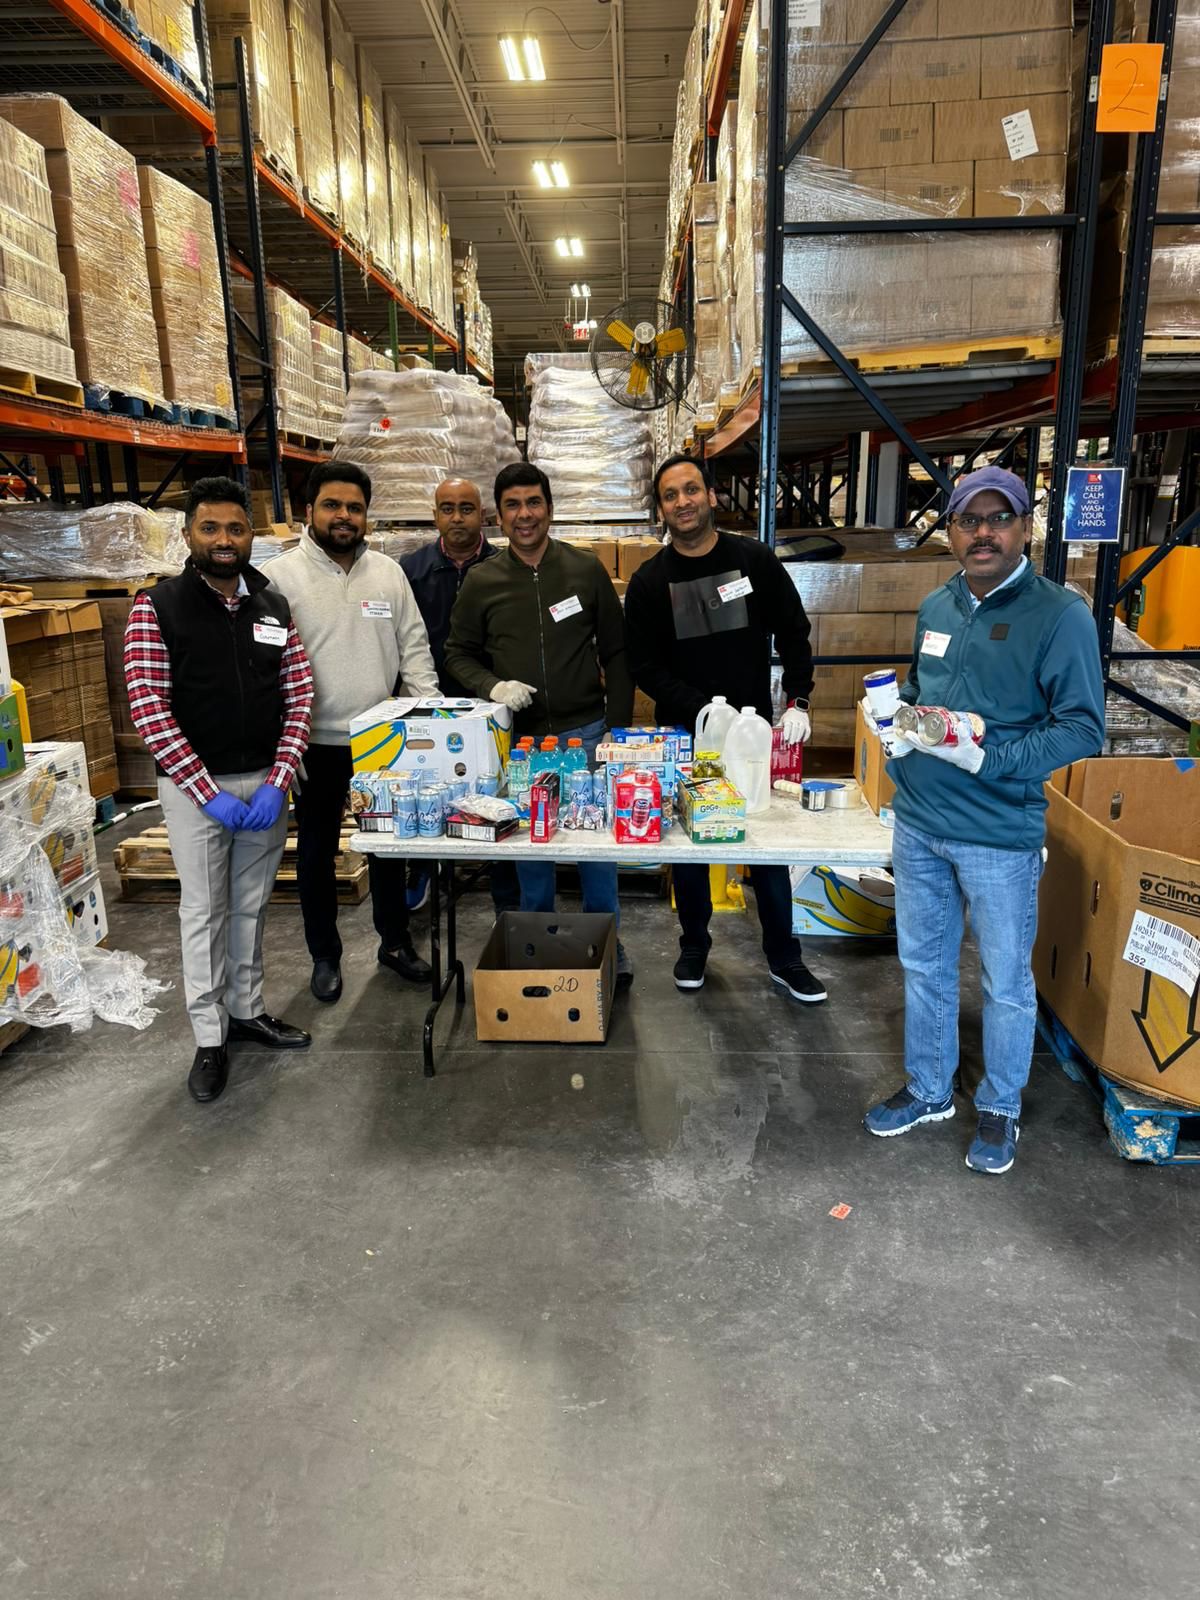 The ITServe Charlotte Chapter supported Second Harvest Food Bank